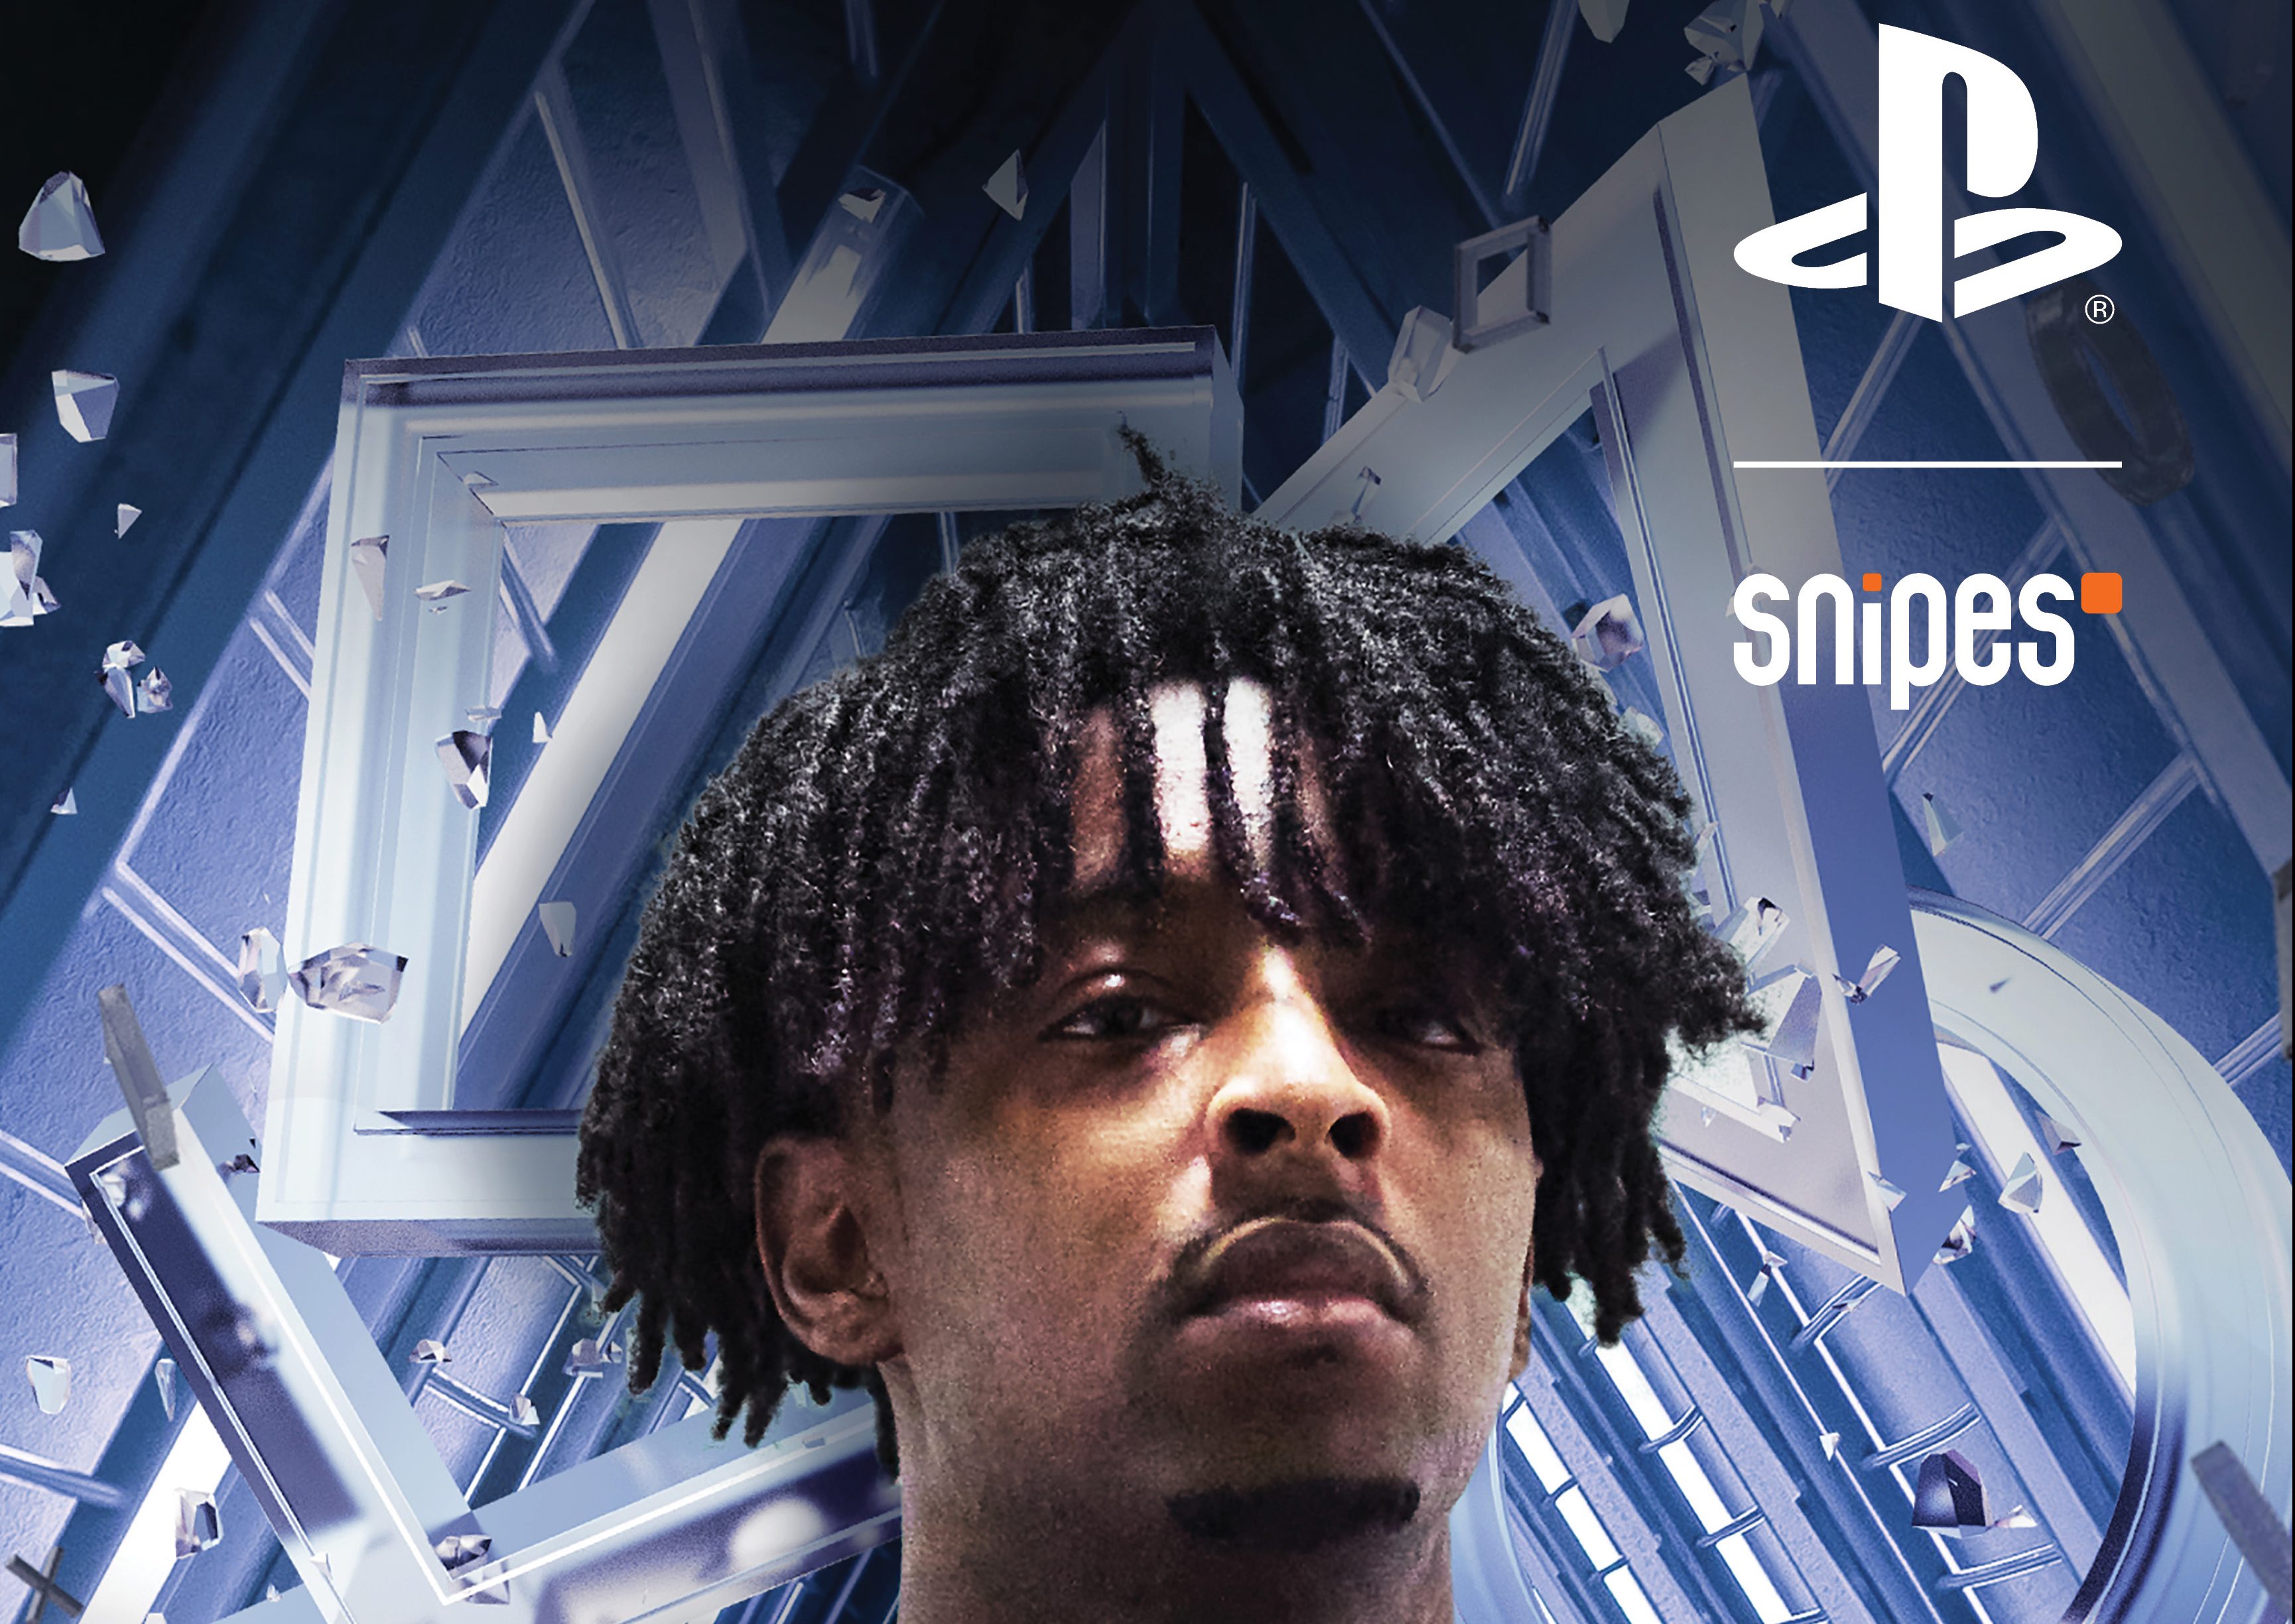 SNIPES Unveils New PlayStation Collaboration Featruing 21 Savage 